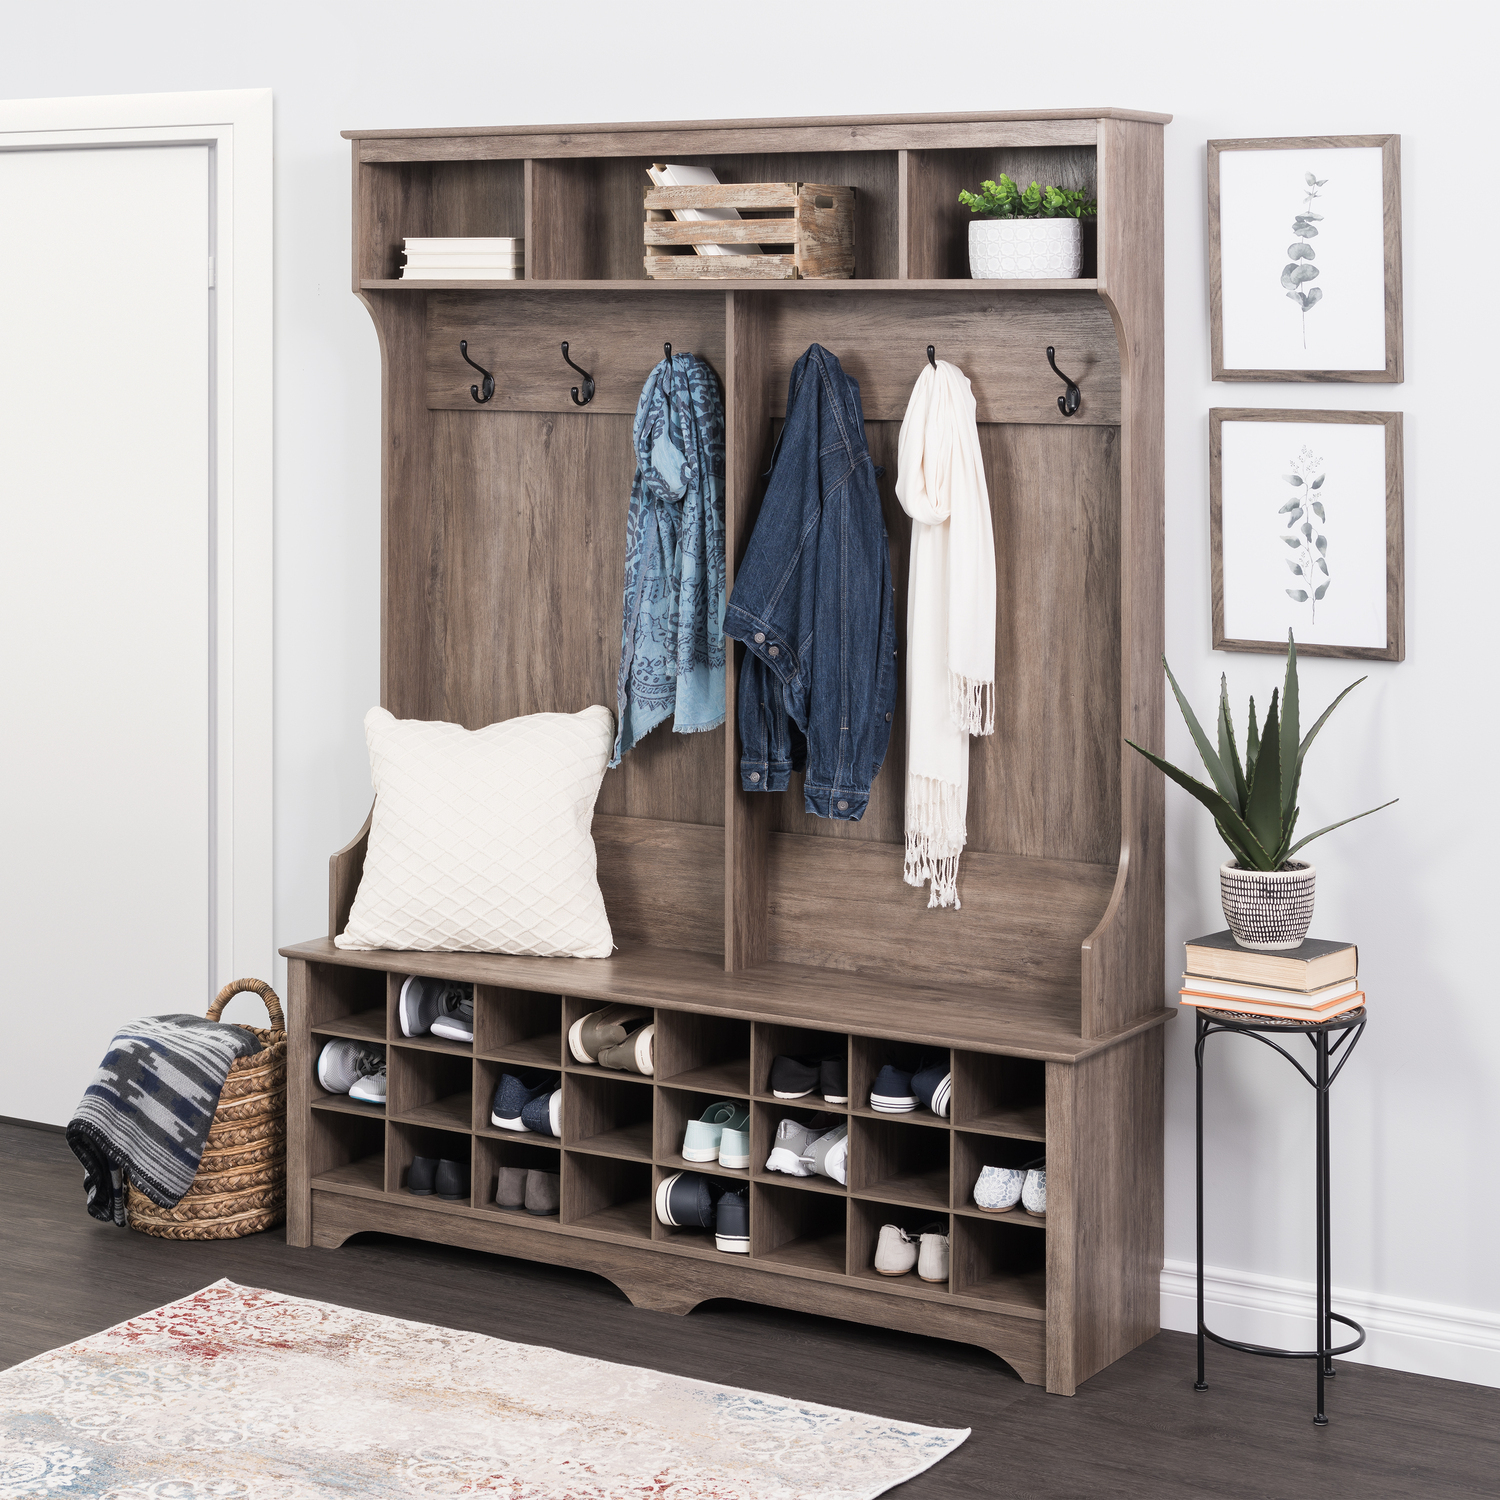 Moon Daughter Narrow Entryway Espresso MDF Wooden Hall Hooks Tree Standalone Seat Bench Shoes 9 Cubbies